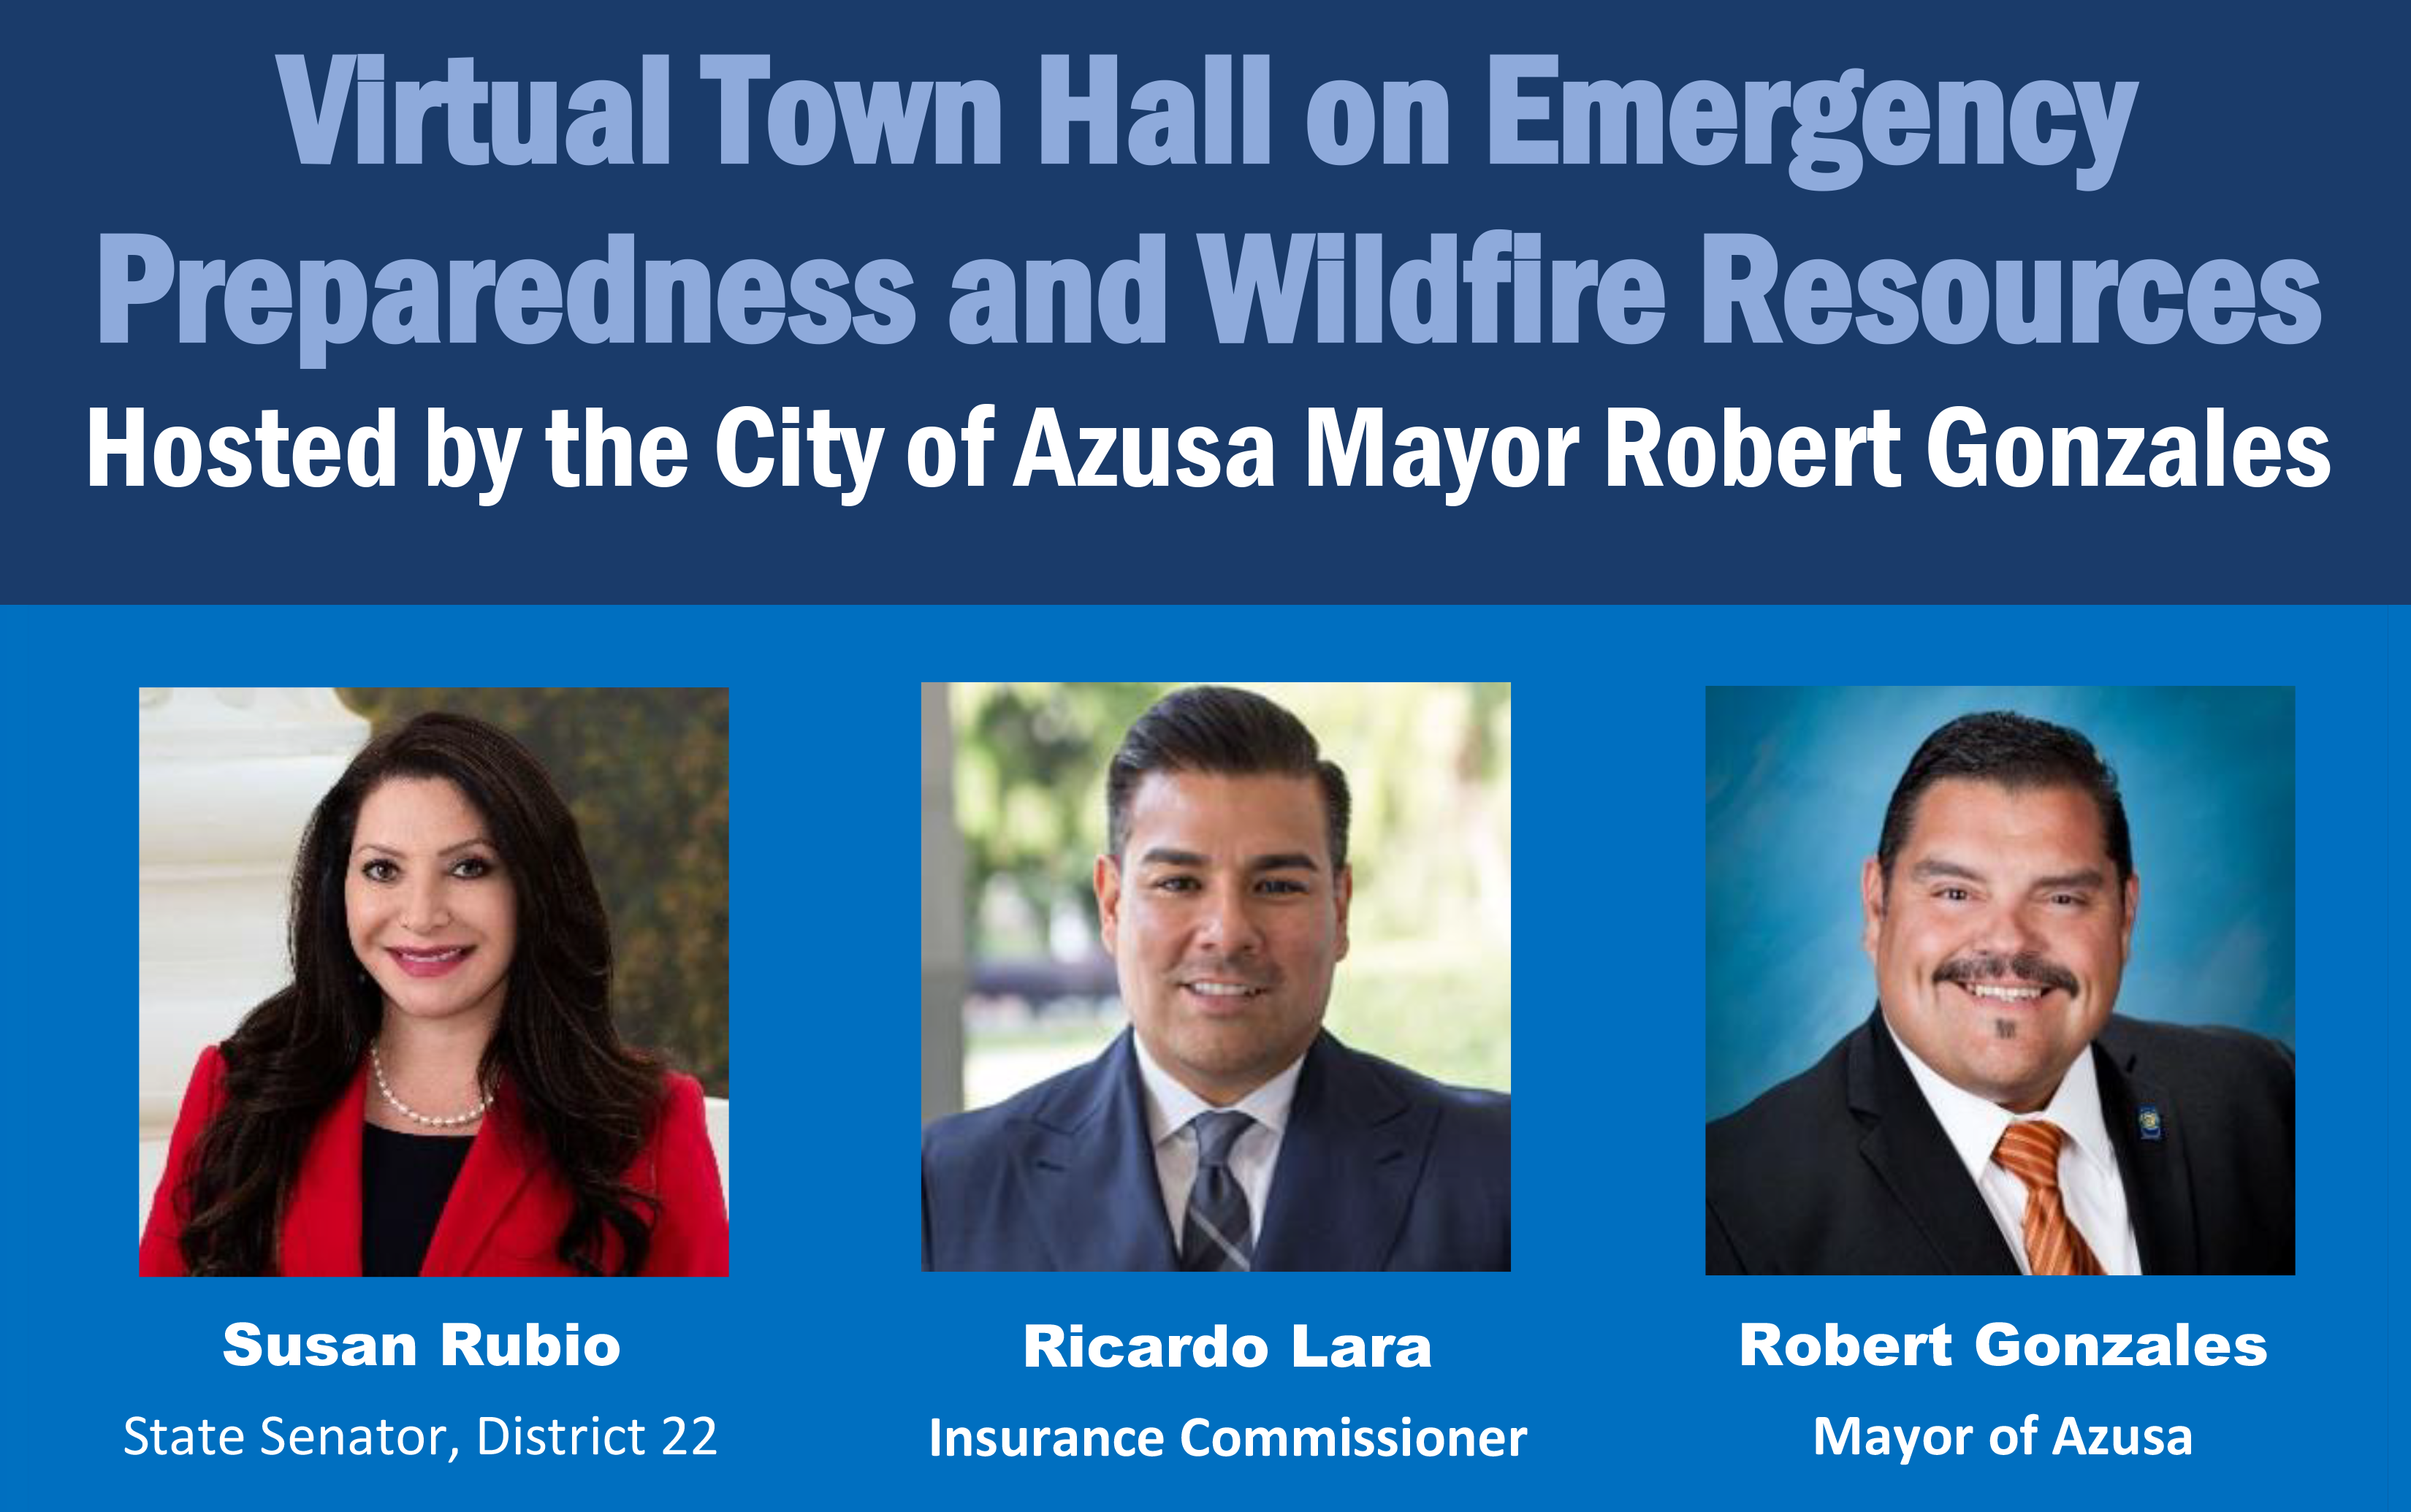 Virtual Town Hall on Emergency Preparedness and Wildfire Resources Hosted by the City of Azusa Mayor Robert Gonzales Susan Rubio, State Senator, District 22 Ricardo Lara, Insurance Commissioner Robert Gonzales, Mayor of Azusa